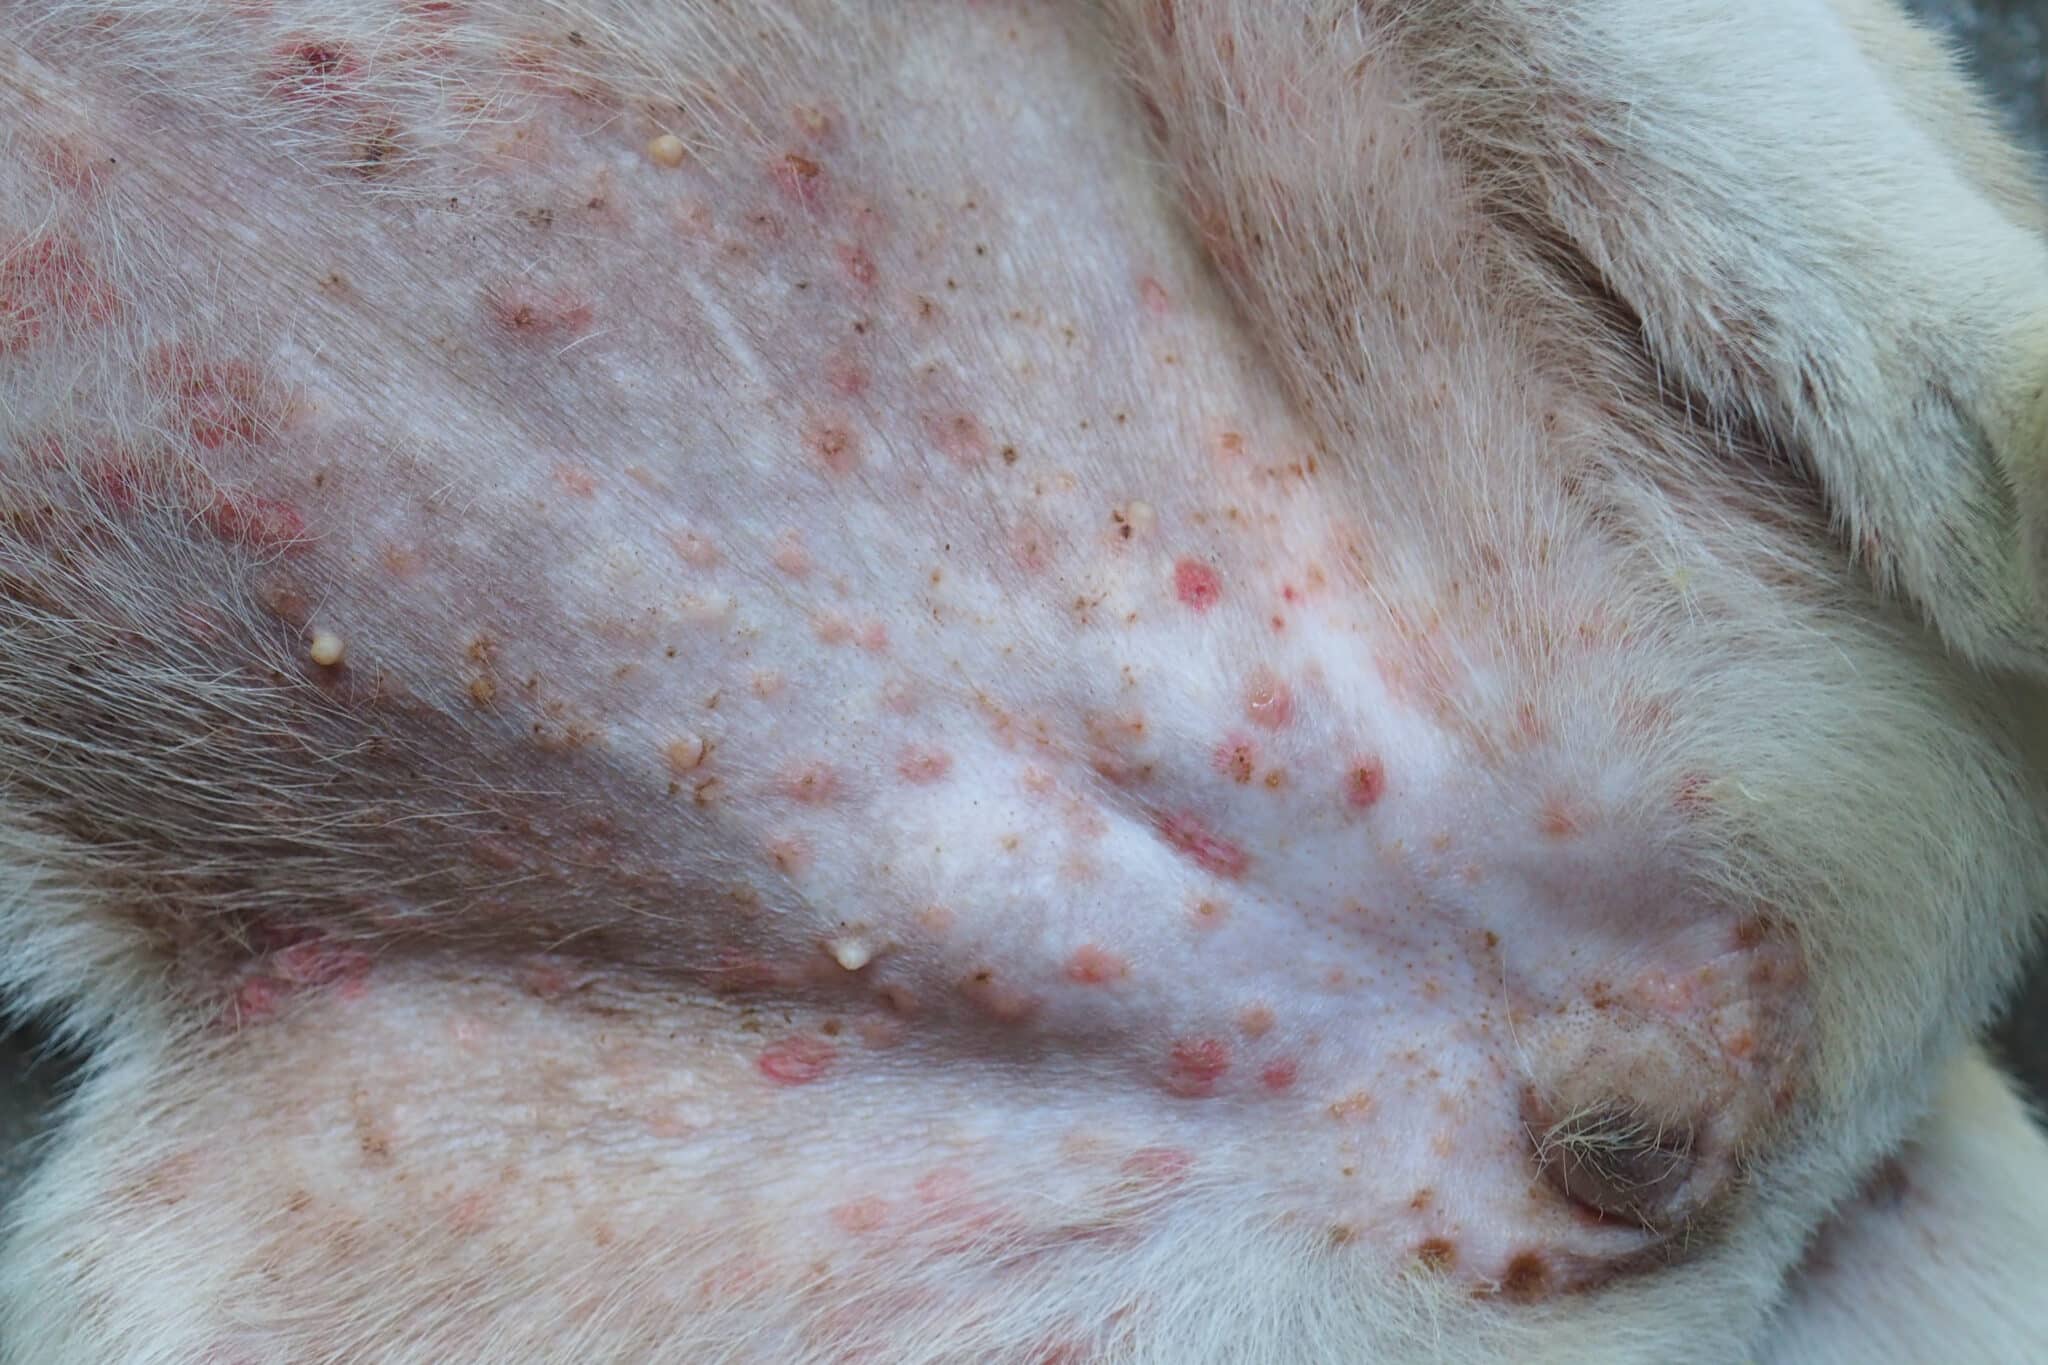 6 Of The Most Common Dog Skin Conditions